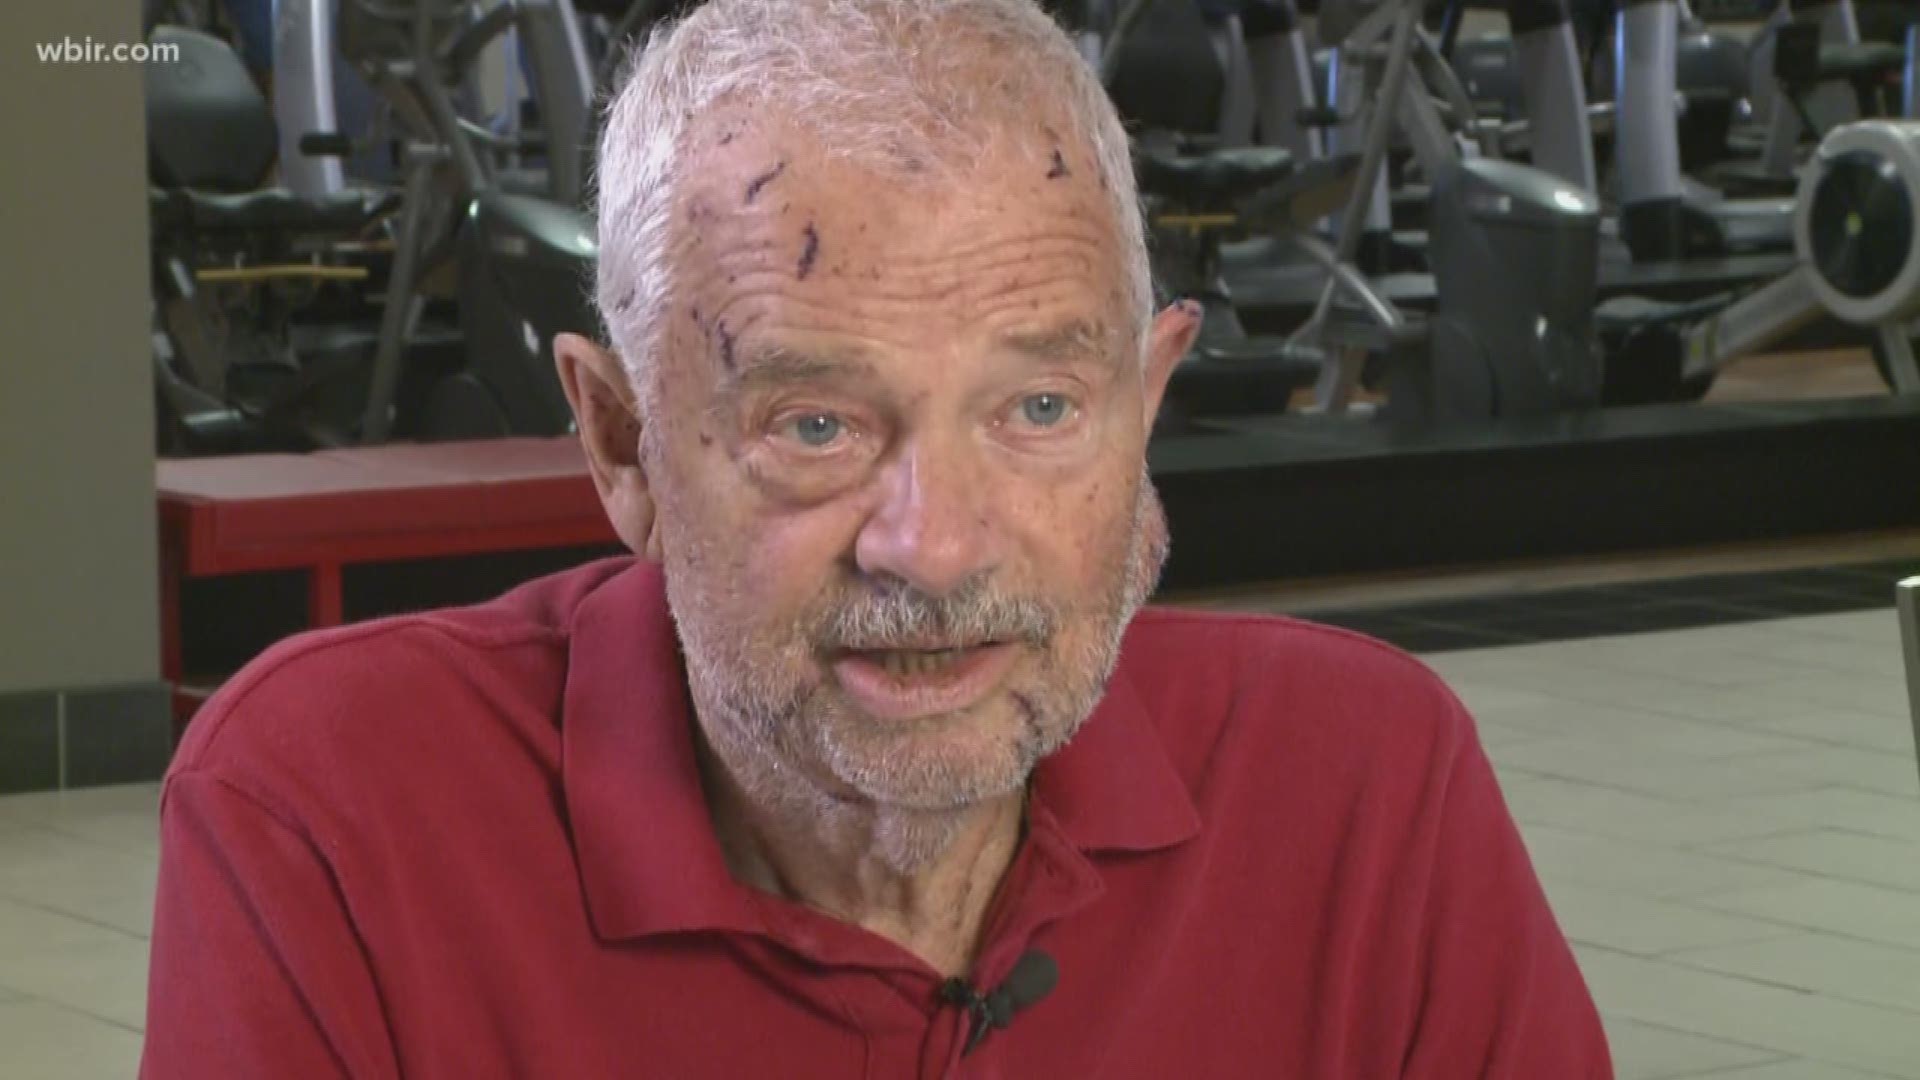 A 79-year-old man stabbed on a West Knoxville greenway is talking about what happened and the outpouring of support he's received.